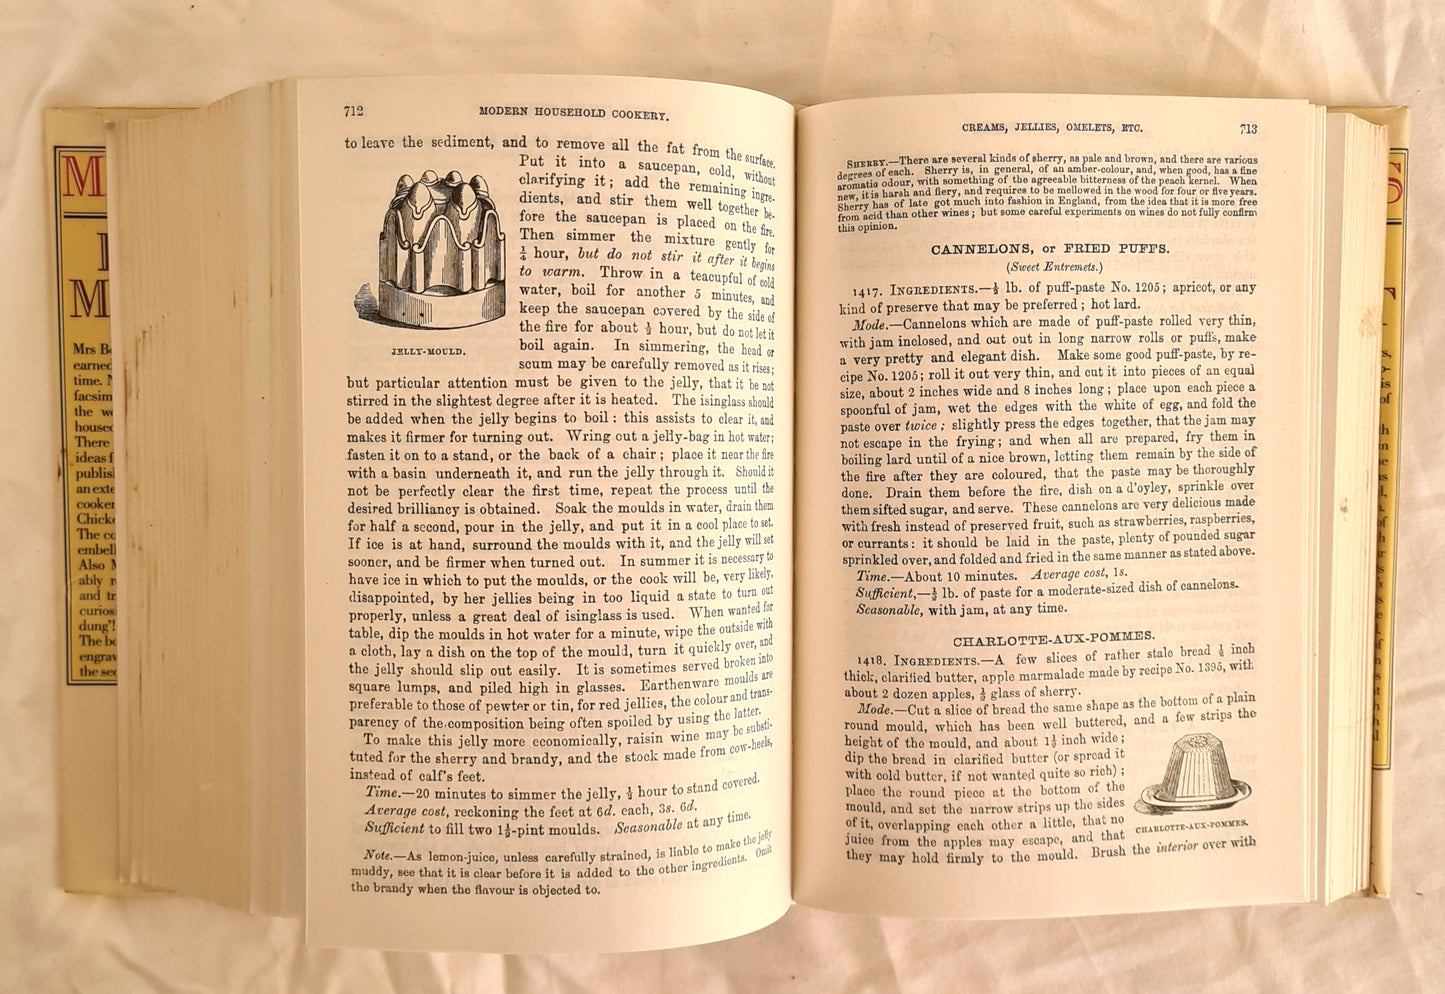 Mrs Beeton’s Book of Household Management by Mrs. Isabella Beeton